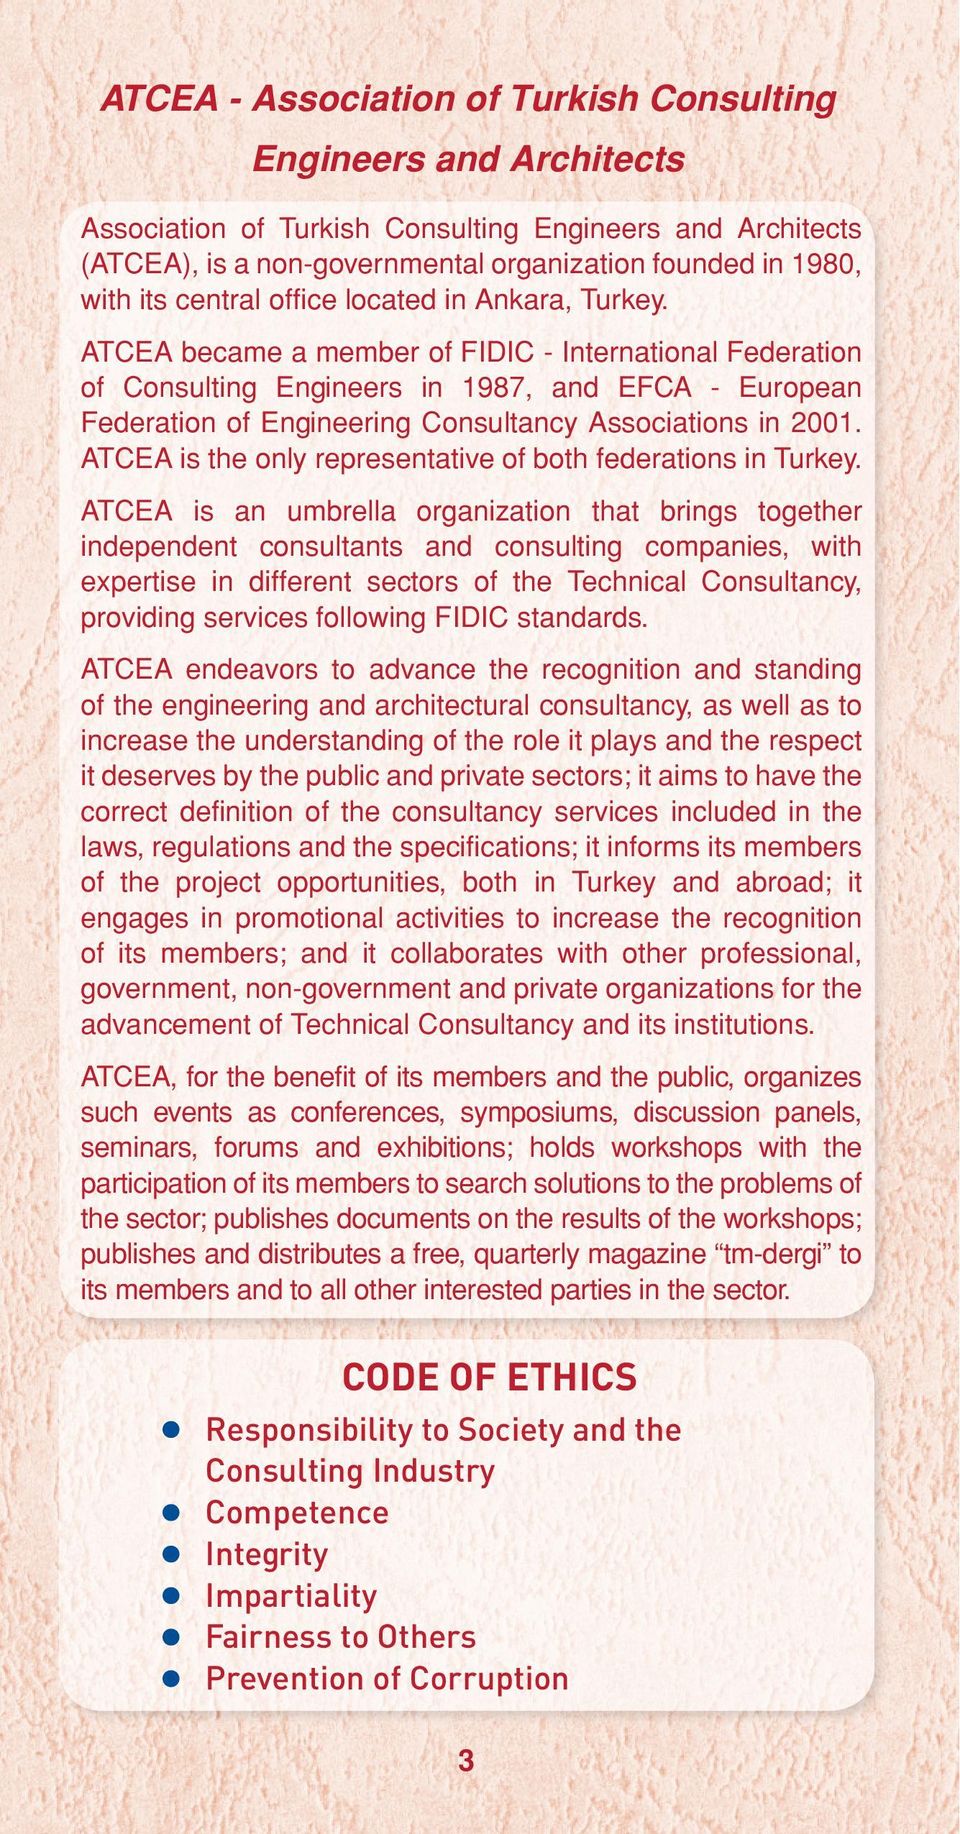 ATCEA became a member of FIDIC - International Federation of Consulting Engineers in 1987, and EFCA - European Federation of Engineering Consultancy Associations in 2001.